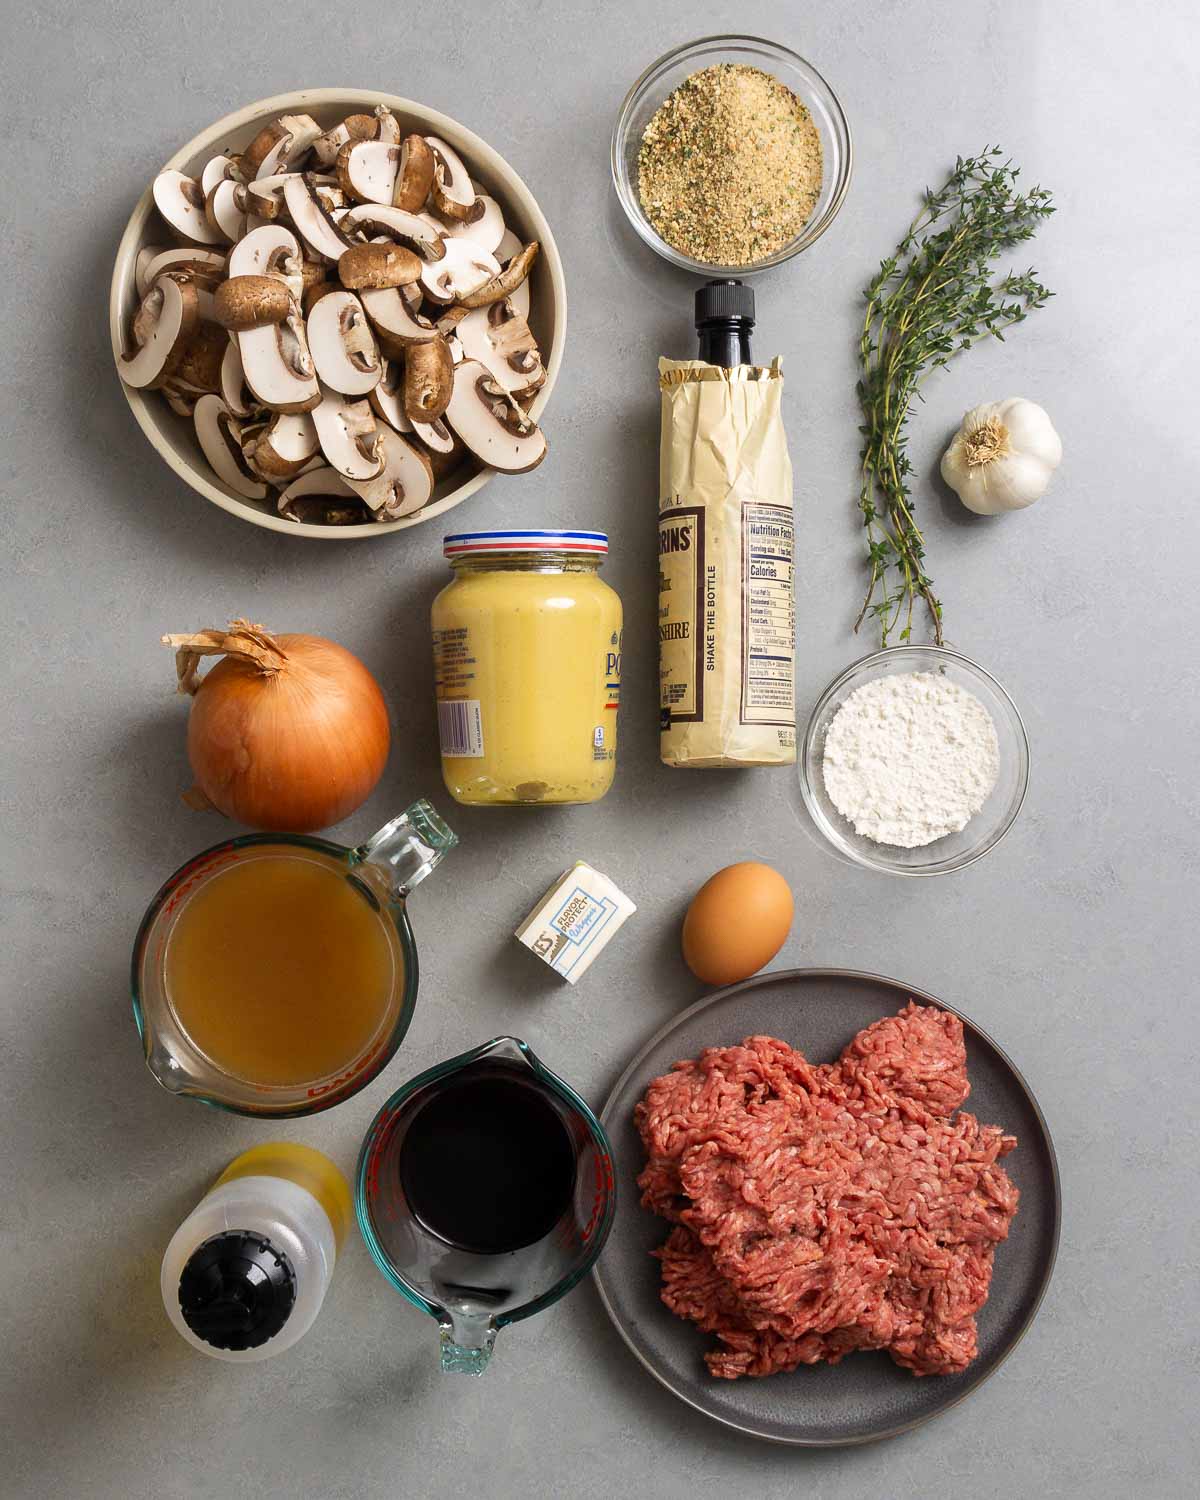 Ingredients shown: mushrooms, breadcrumbs, worcestershire sauce, thyme, garlic, Dijon mustard, onion, flour, beef stock, butter, egg, olive oil, red wine, and ground 80/20 chuck.